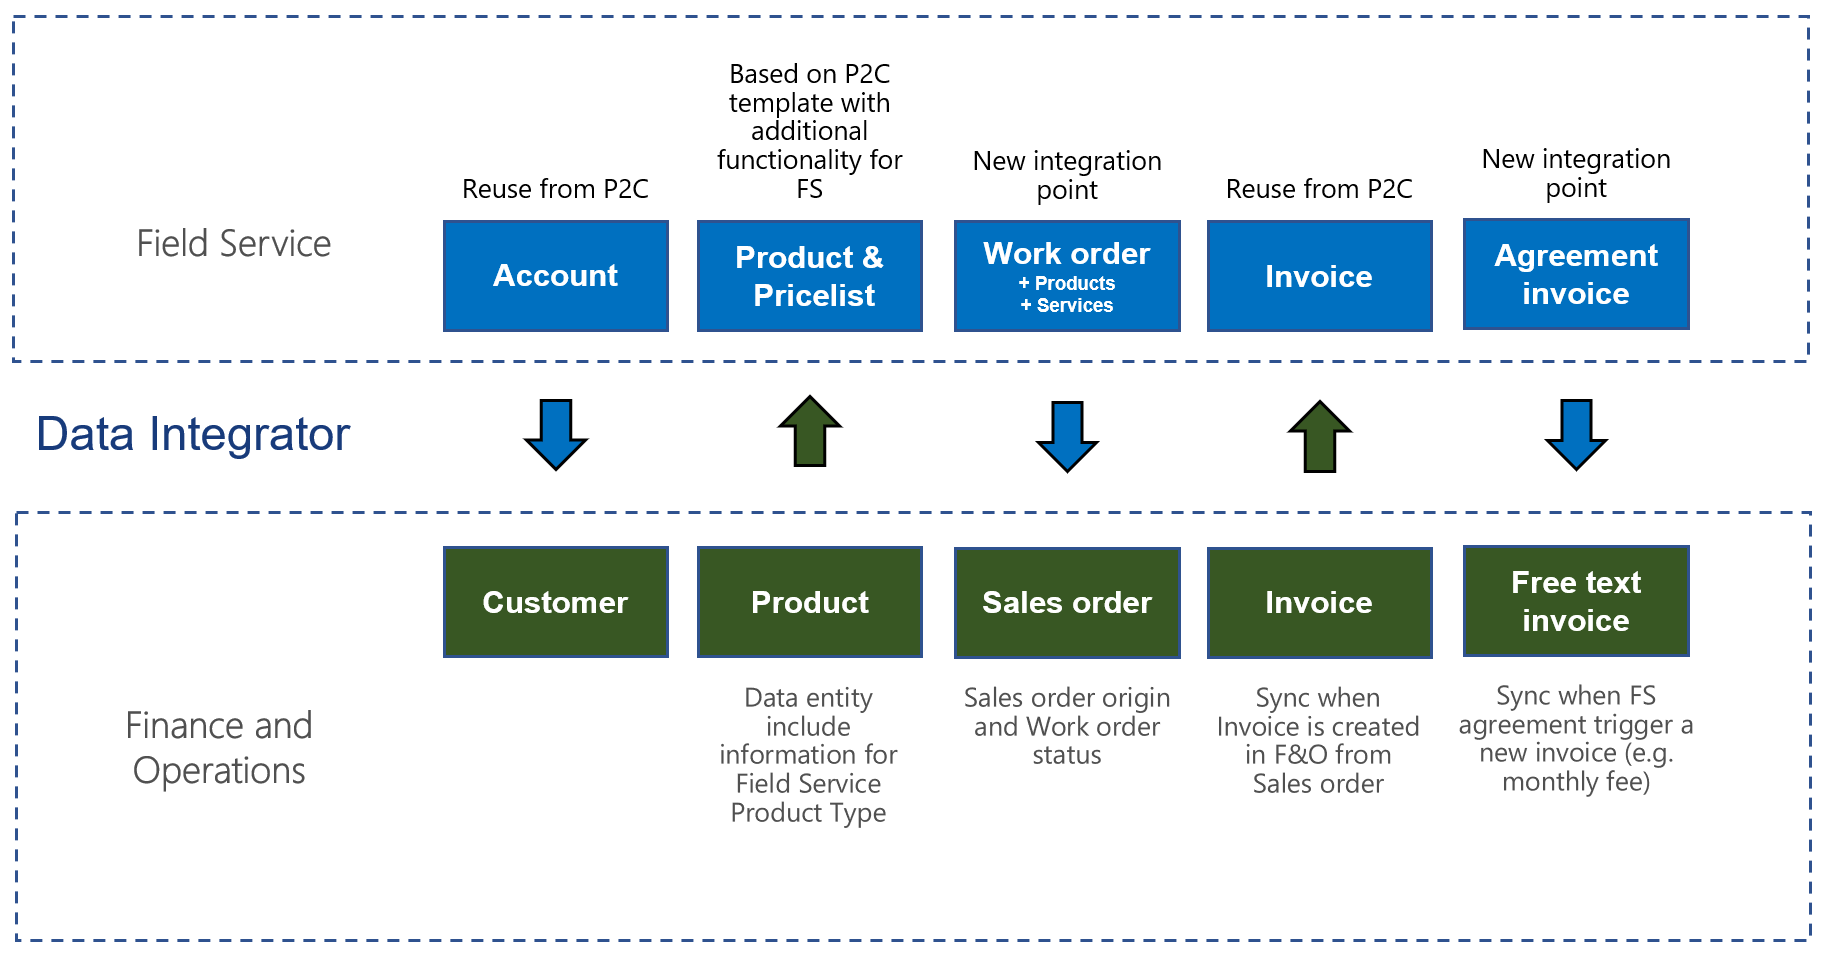 Synchronize work orders in Field Service to sales orders in Supply